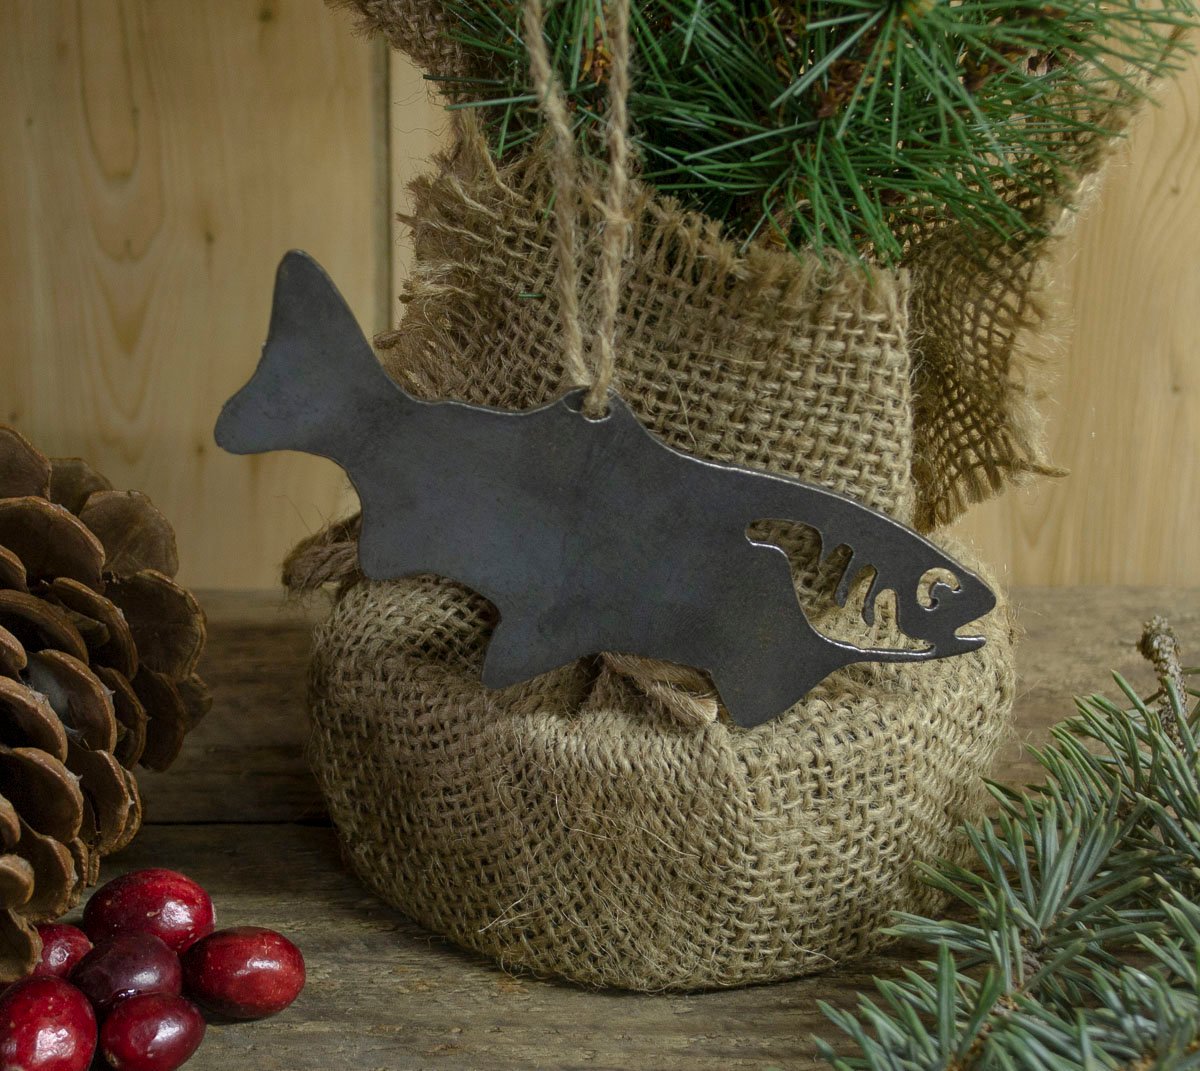 Trout Fishing Metal Christmas Ornament Tree Stocking Stuffer Party Favor Holiday Decoration Raw Steel Gift Recycled Nature Home Decor